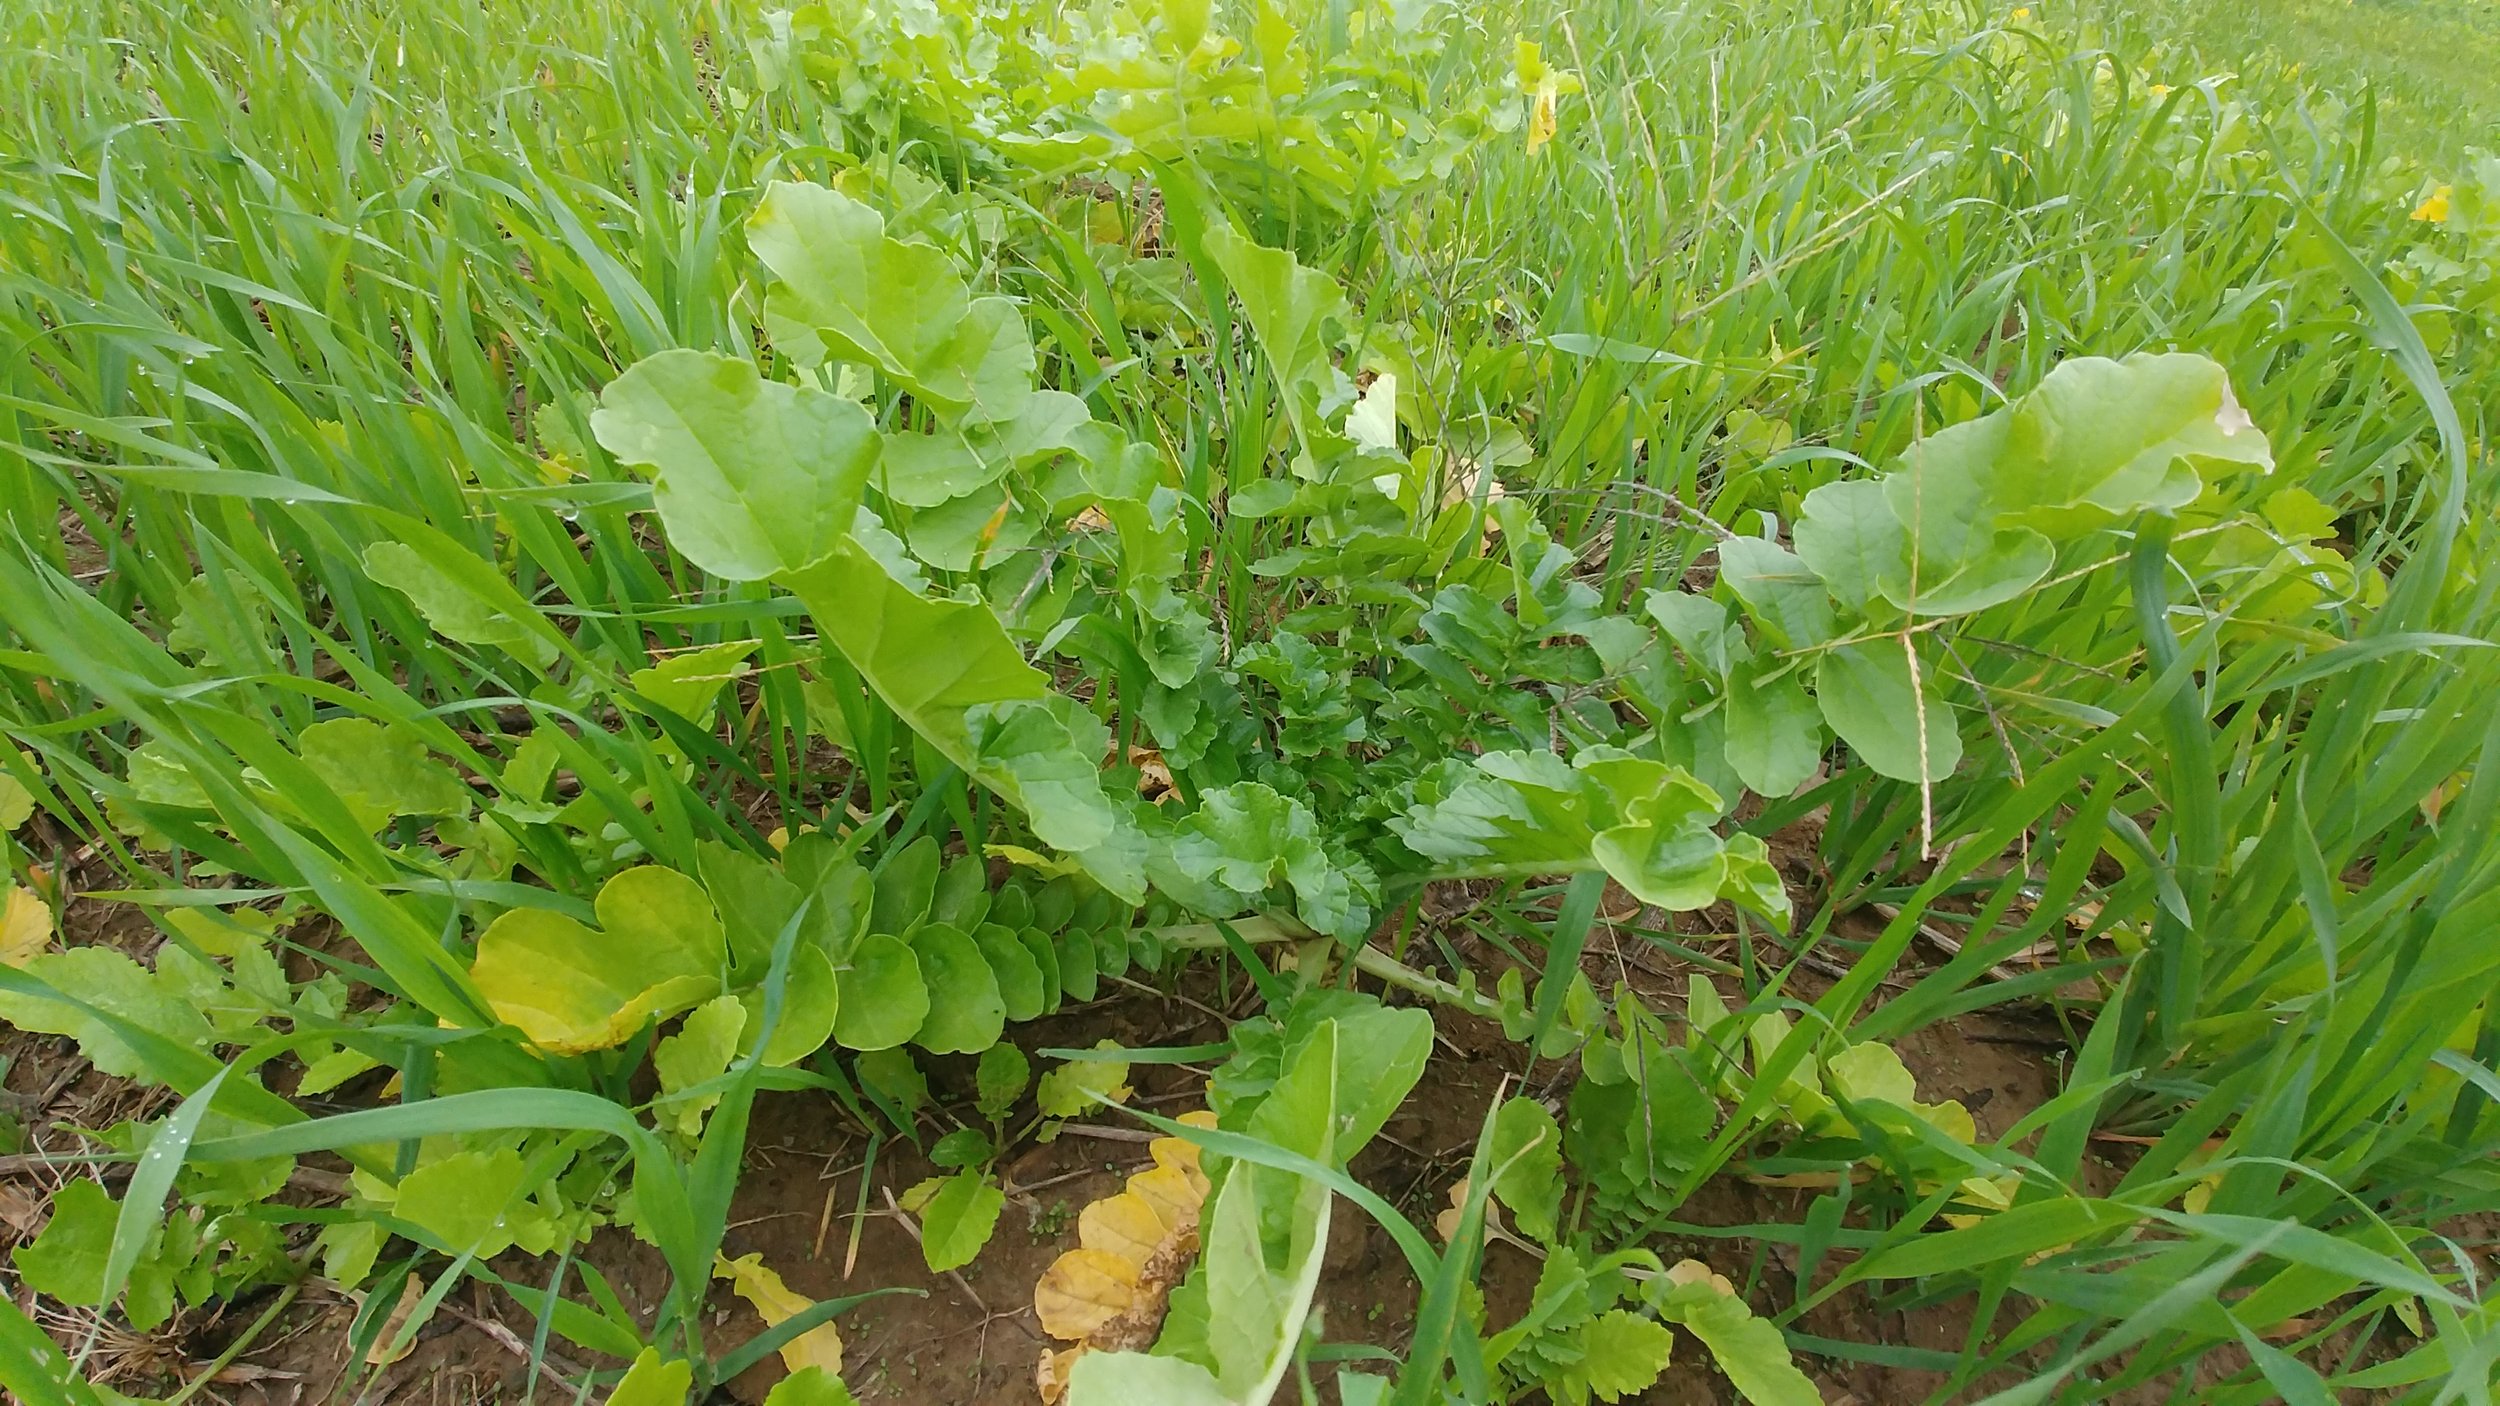 Cullen Page Cover Crops.jpg